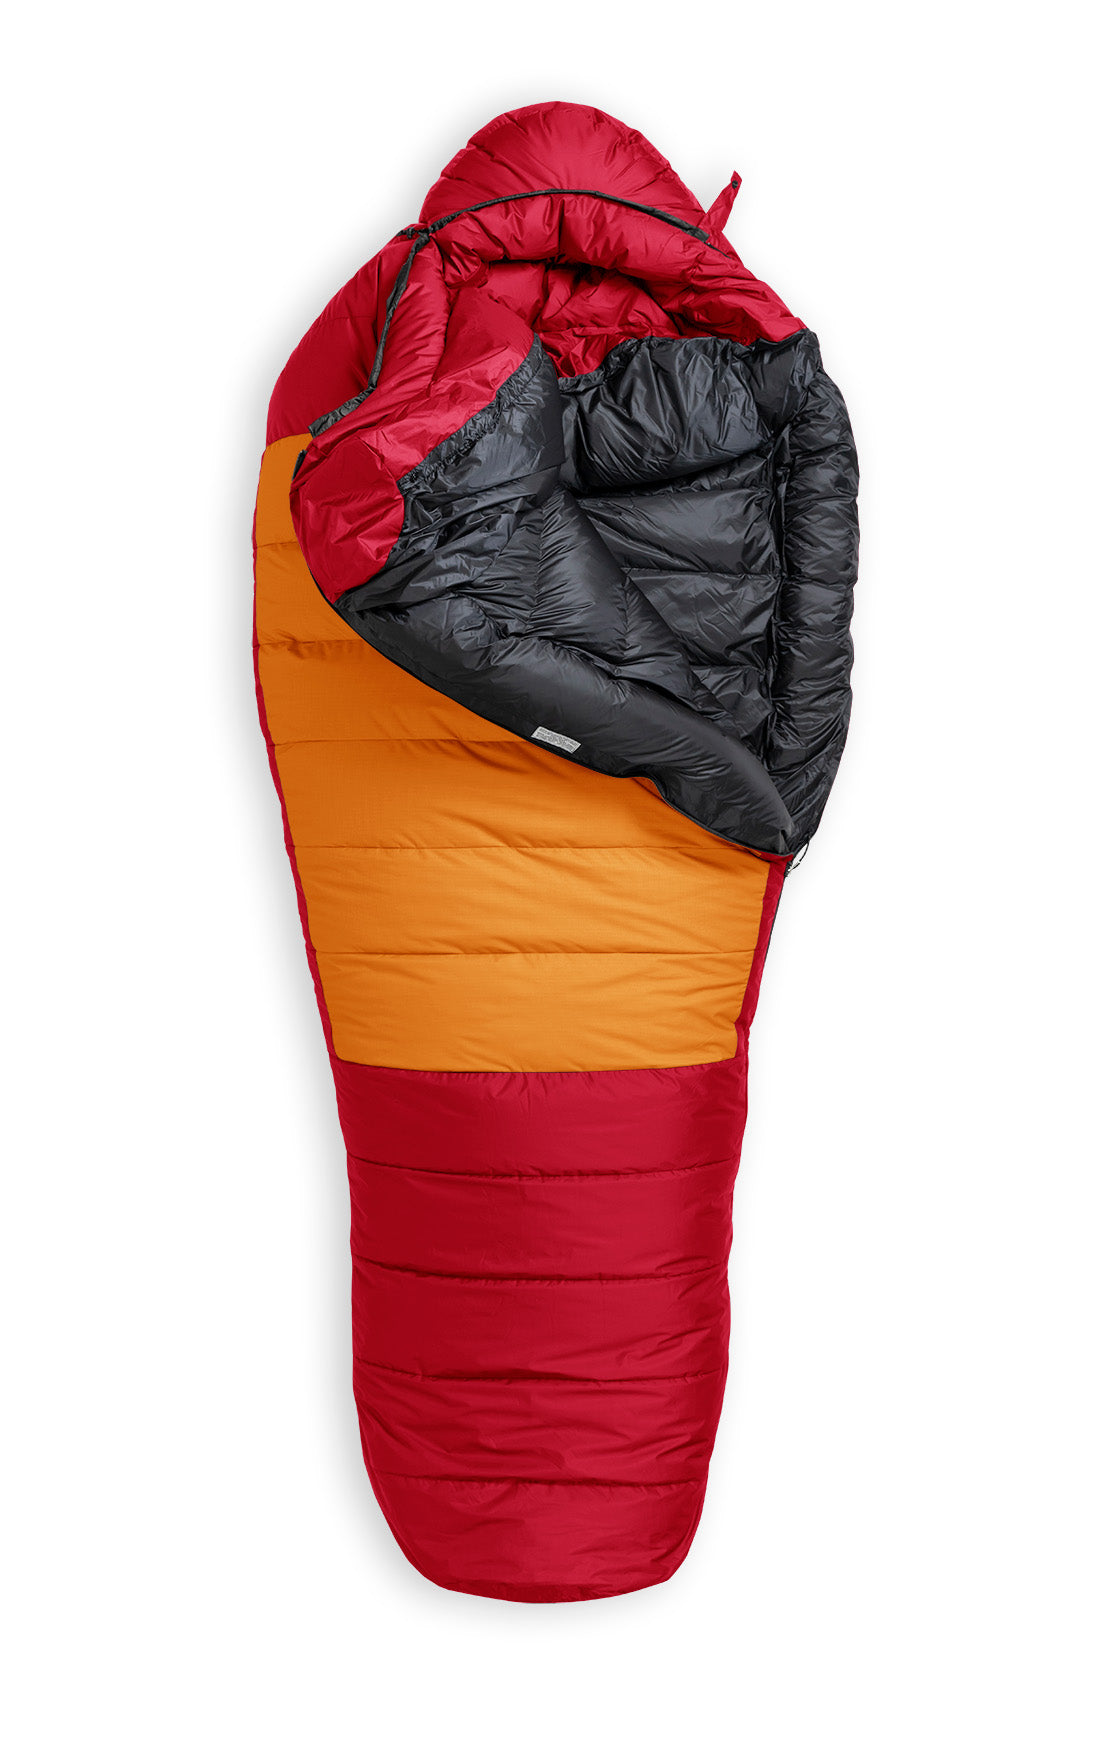 Goose Down Sleeping Bag ECWCS (Extreme Cold Weather